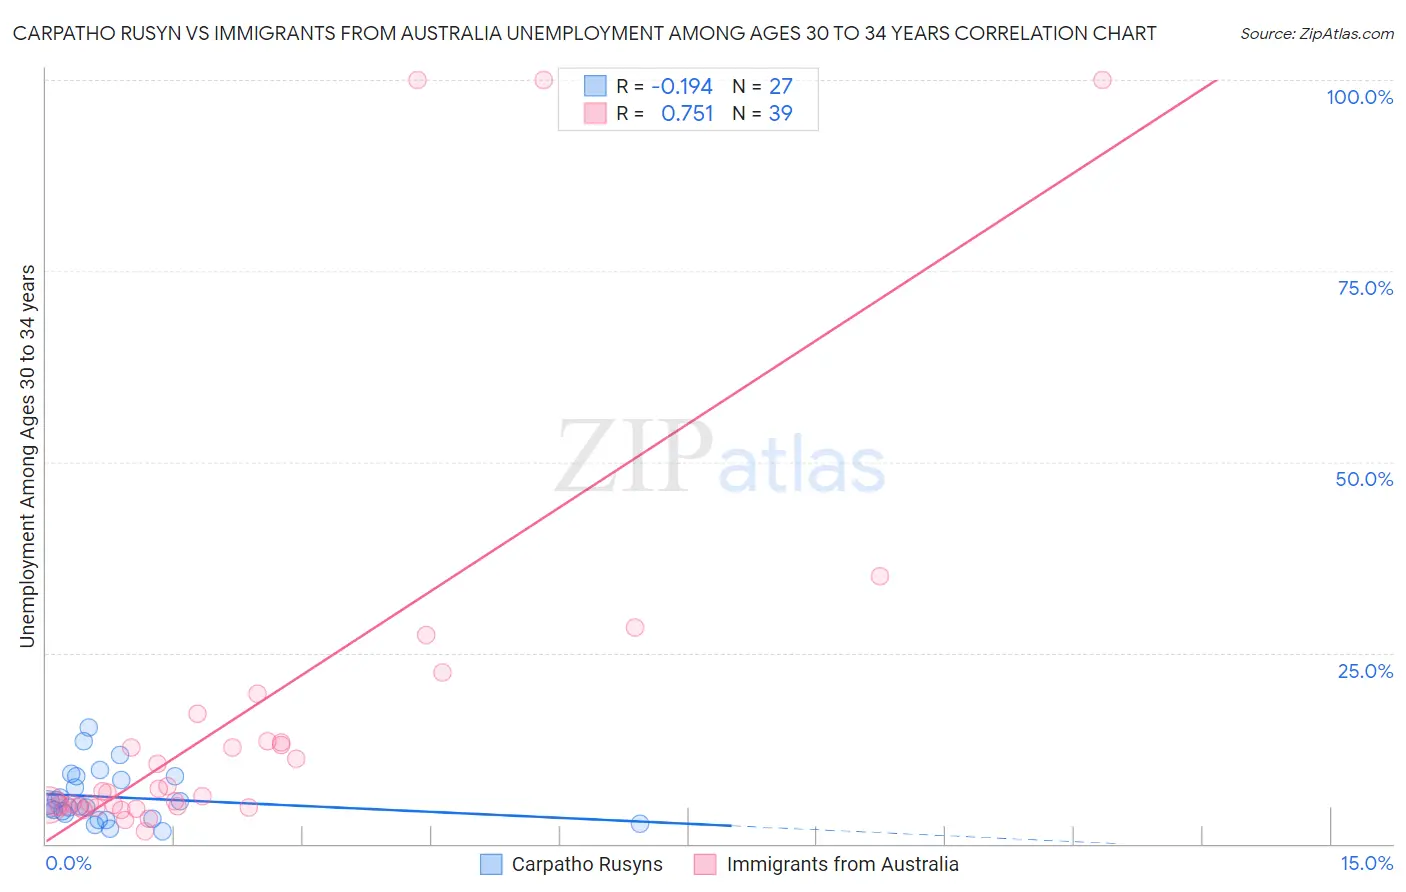 Carpatho Rusyn vs Immigrants from Australia Unemployment Among Ages 30 to 34 years